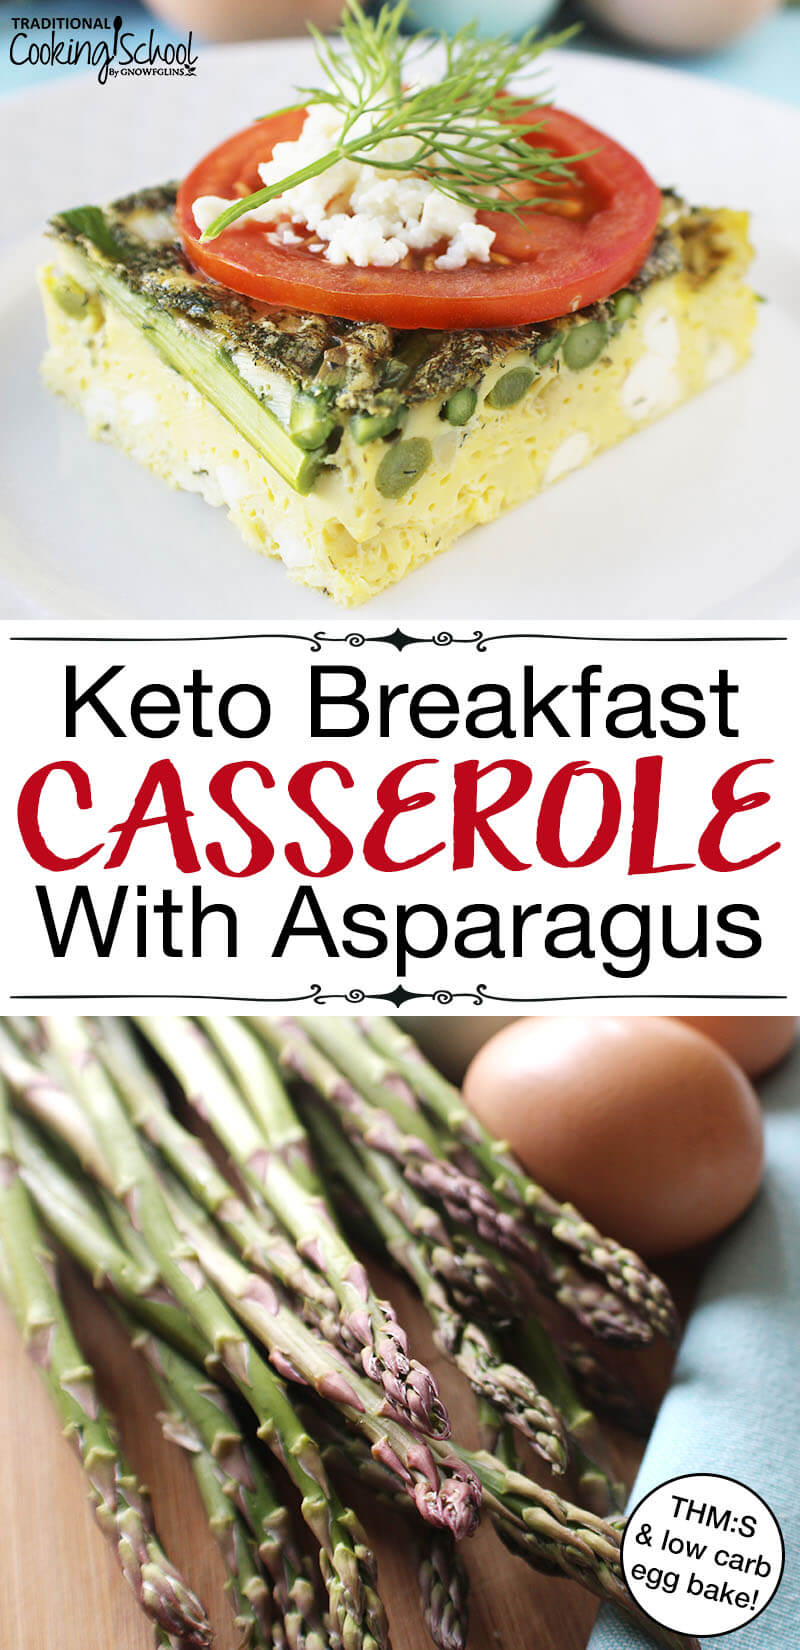 photo collage of an egg casserole with text overlay: "Keto Breakfast Casserole With Asparagus (THM:S & Low Carb Egg Bake!)"